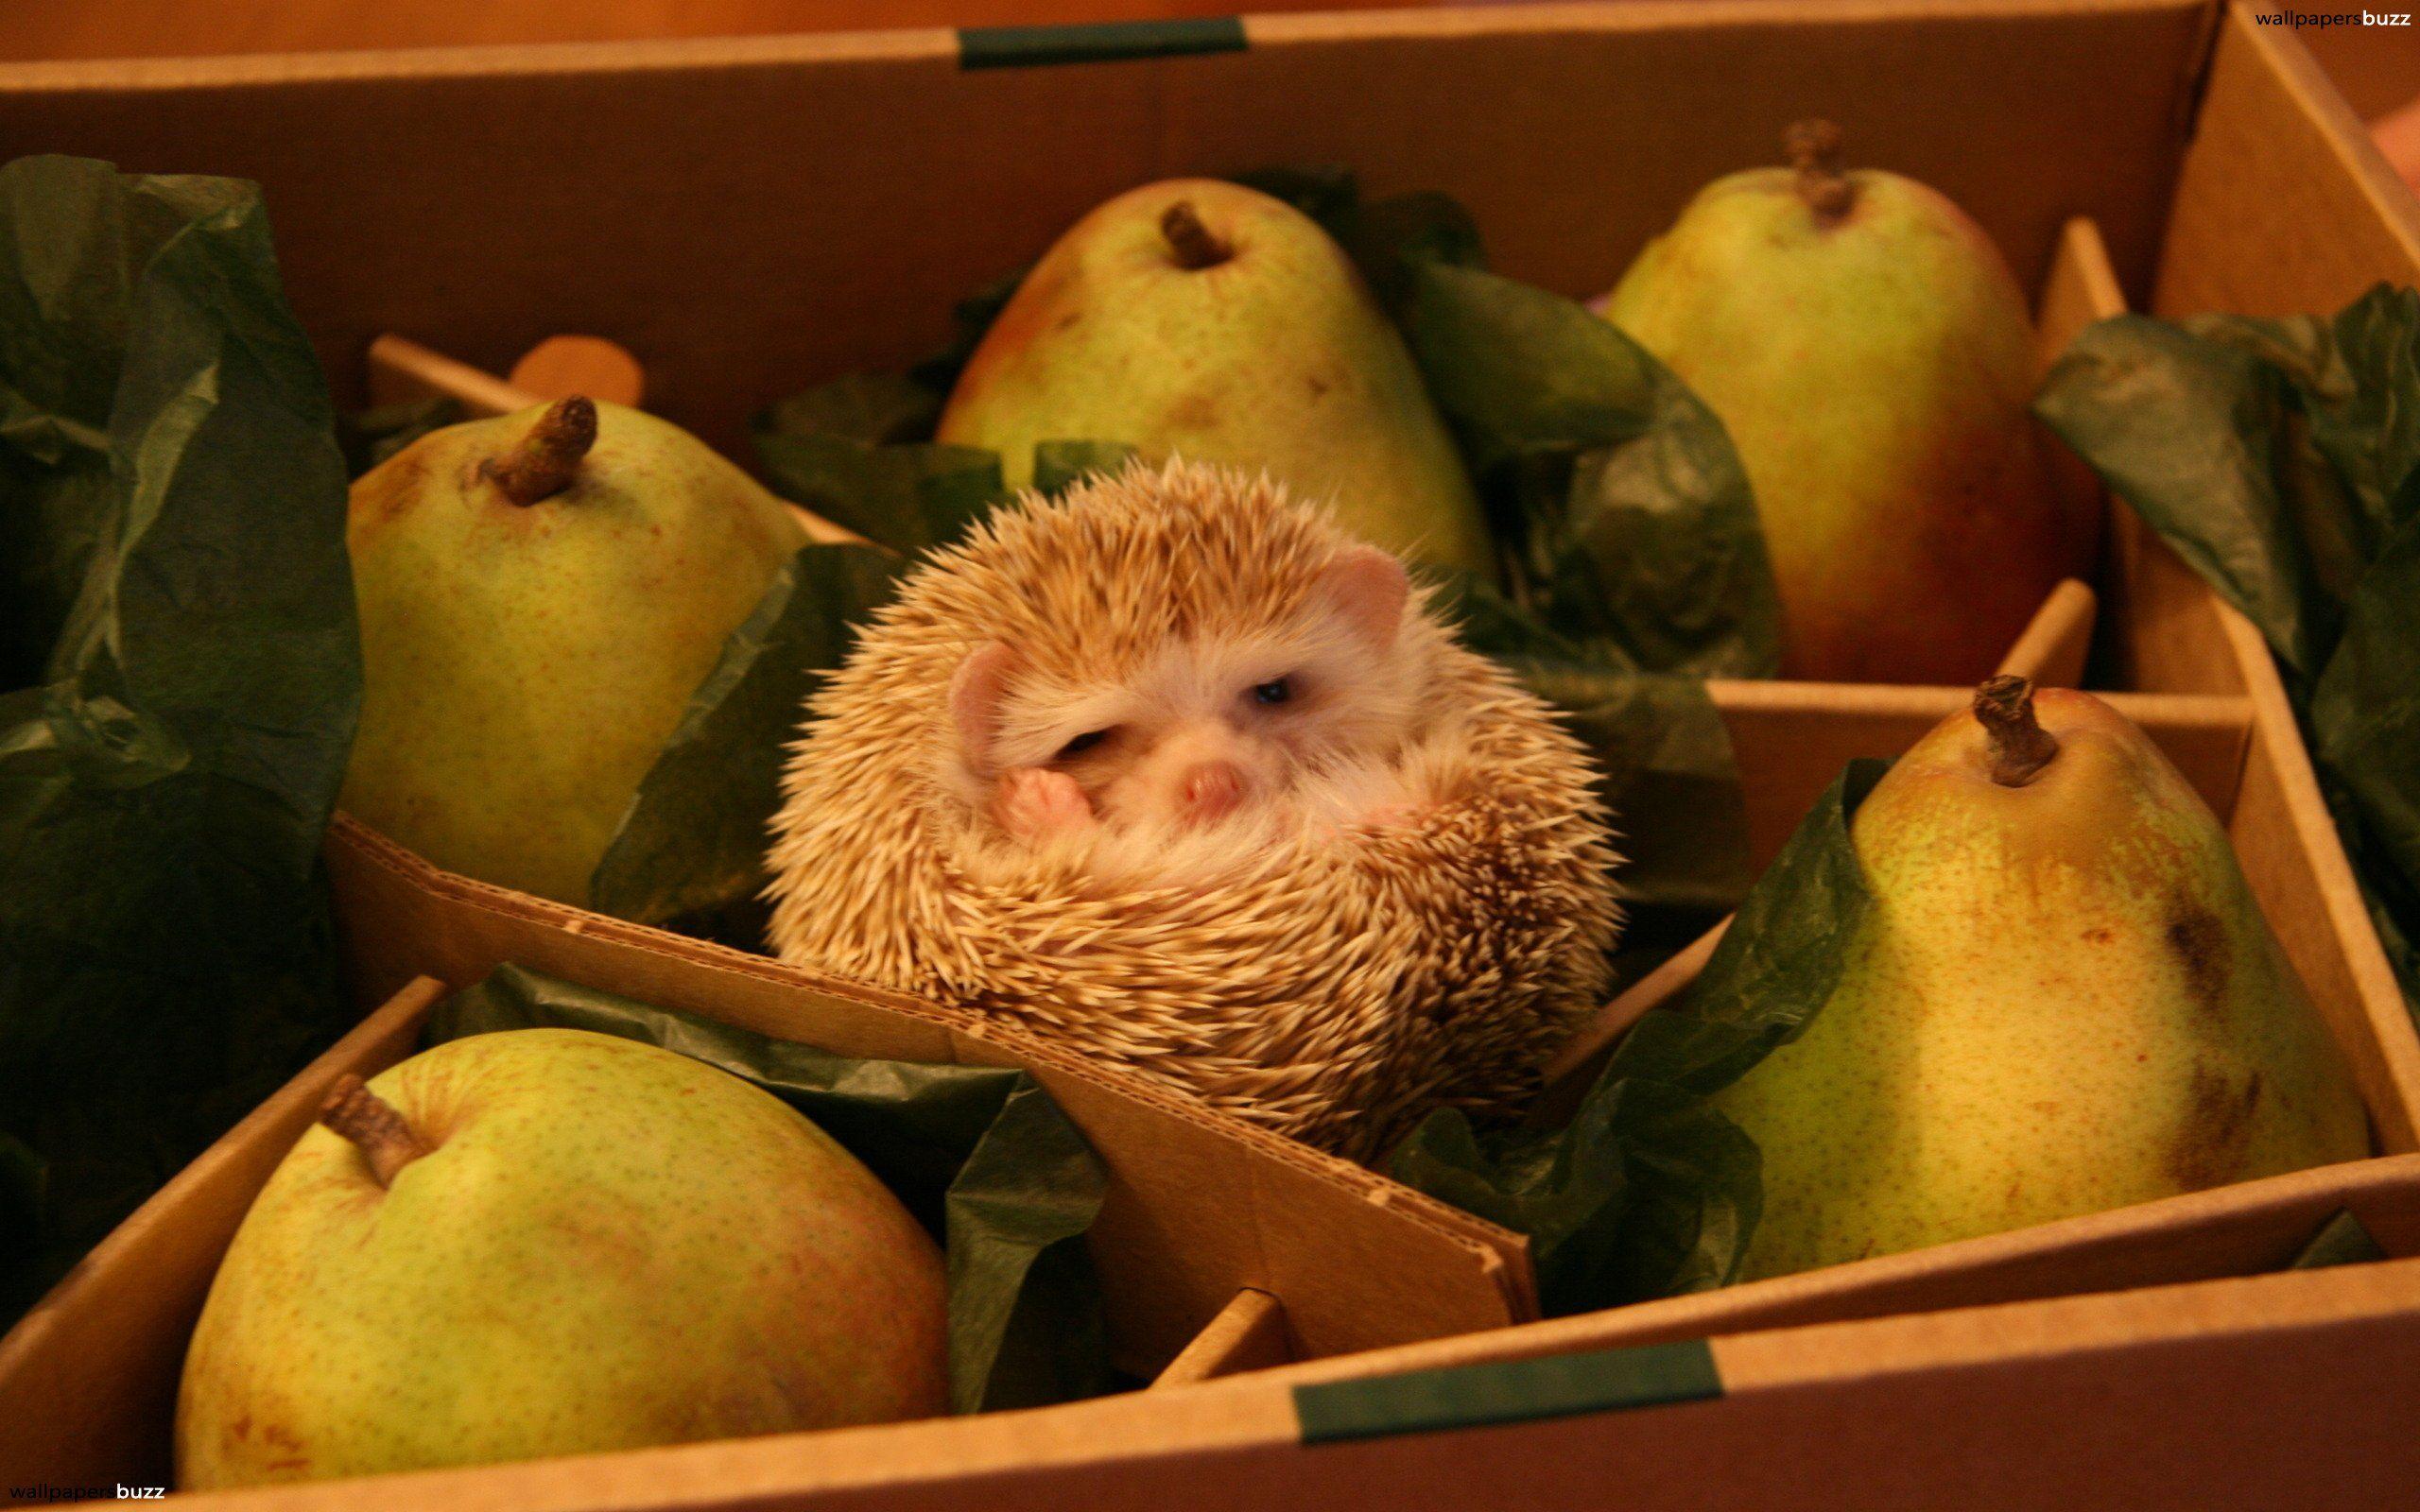 A hedgehog and pears HD Wallpaper